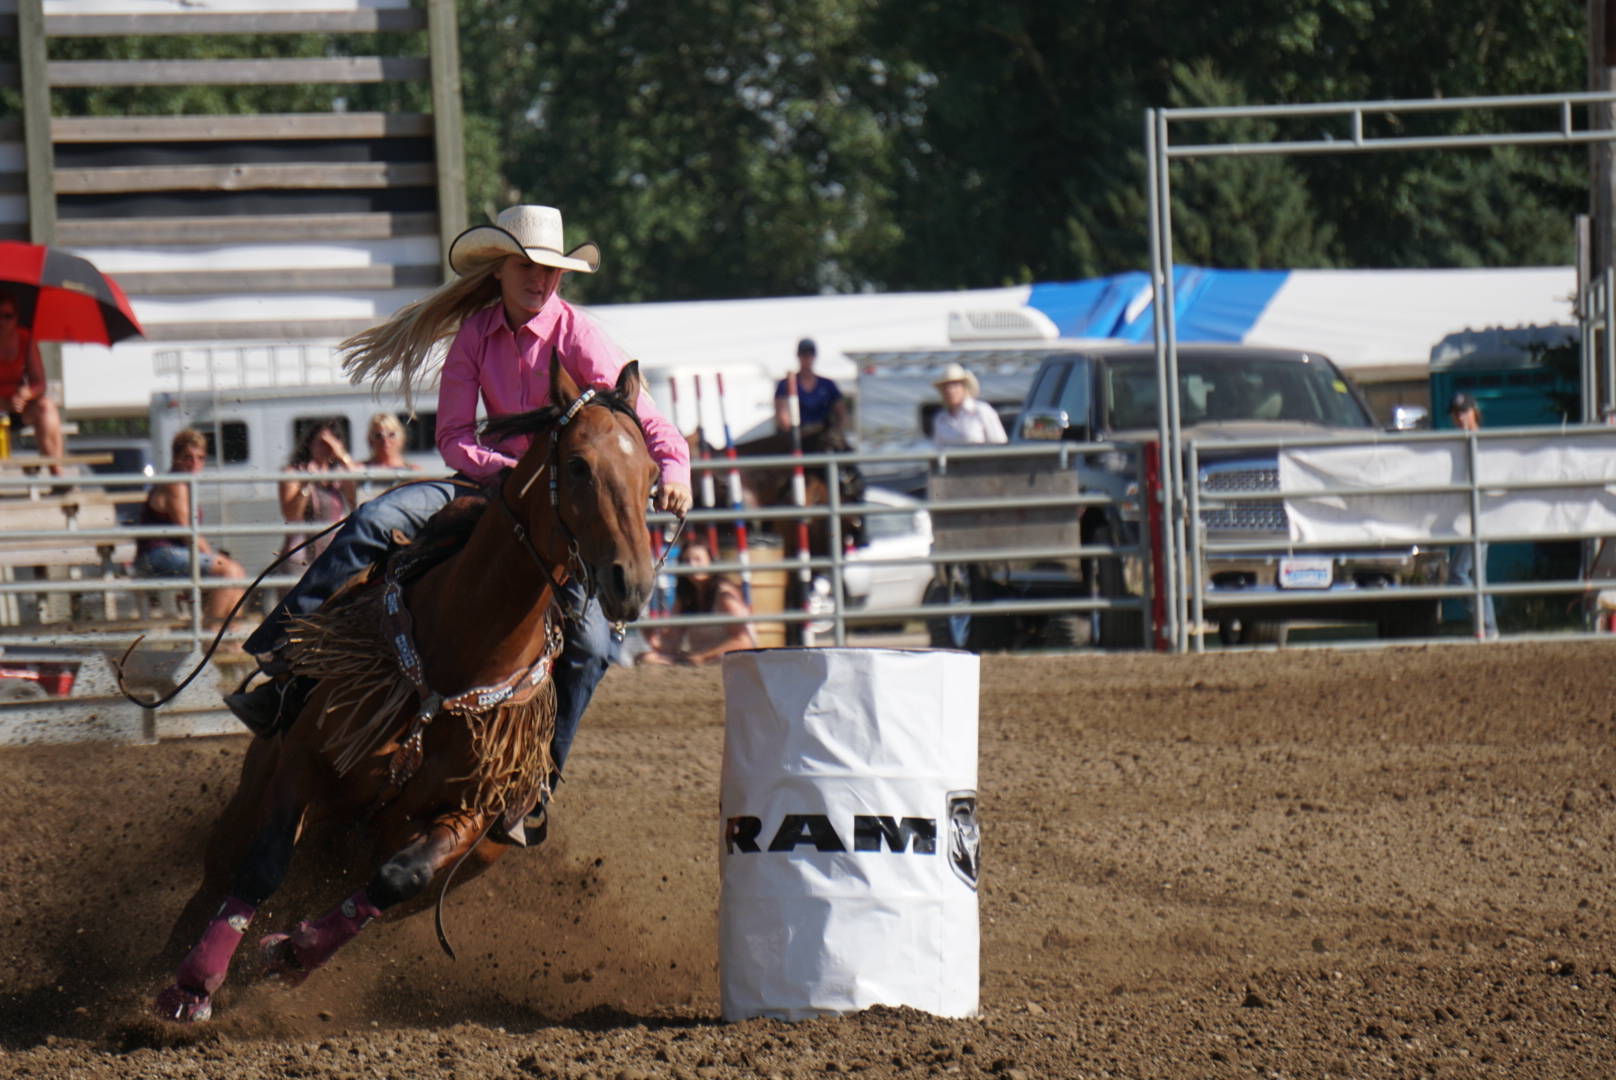 Justine Elliot from Lacombe will be making her Canadian Finals Rodeo debut this week in Red Deer. Photo Submitted